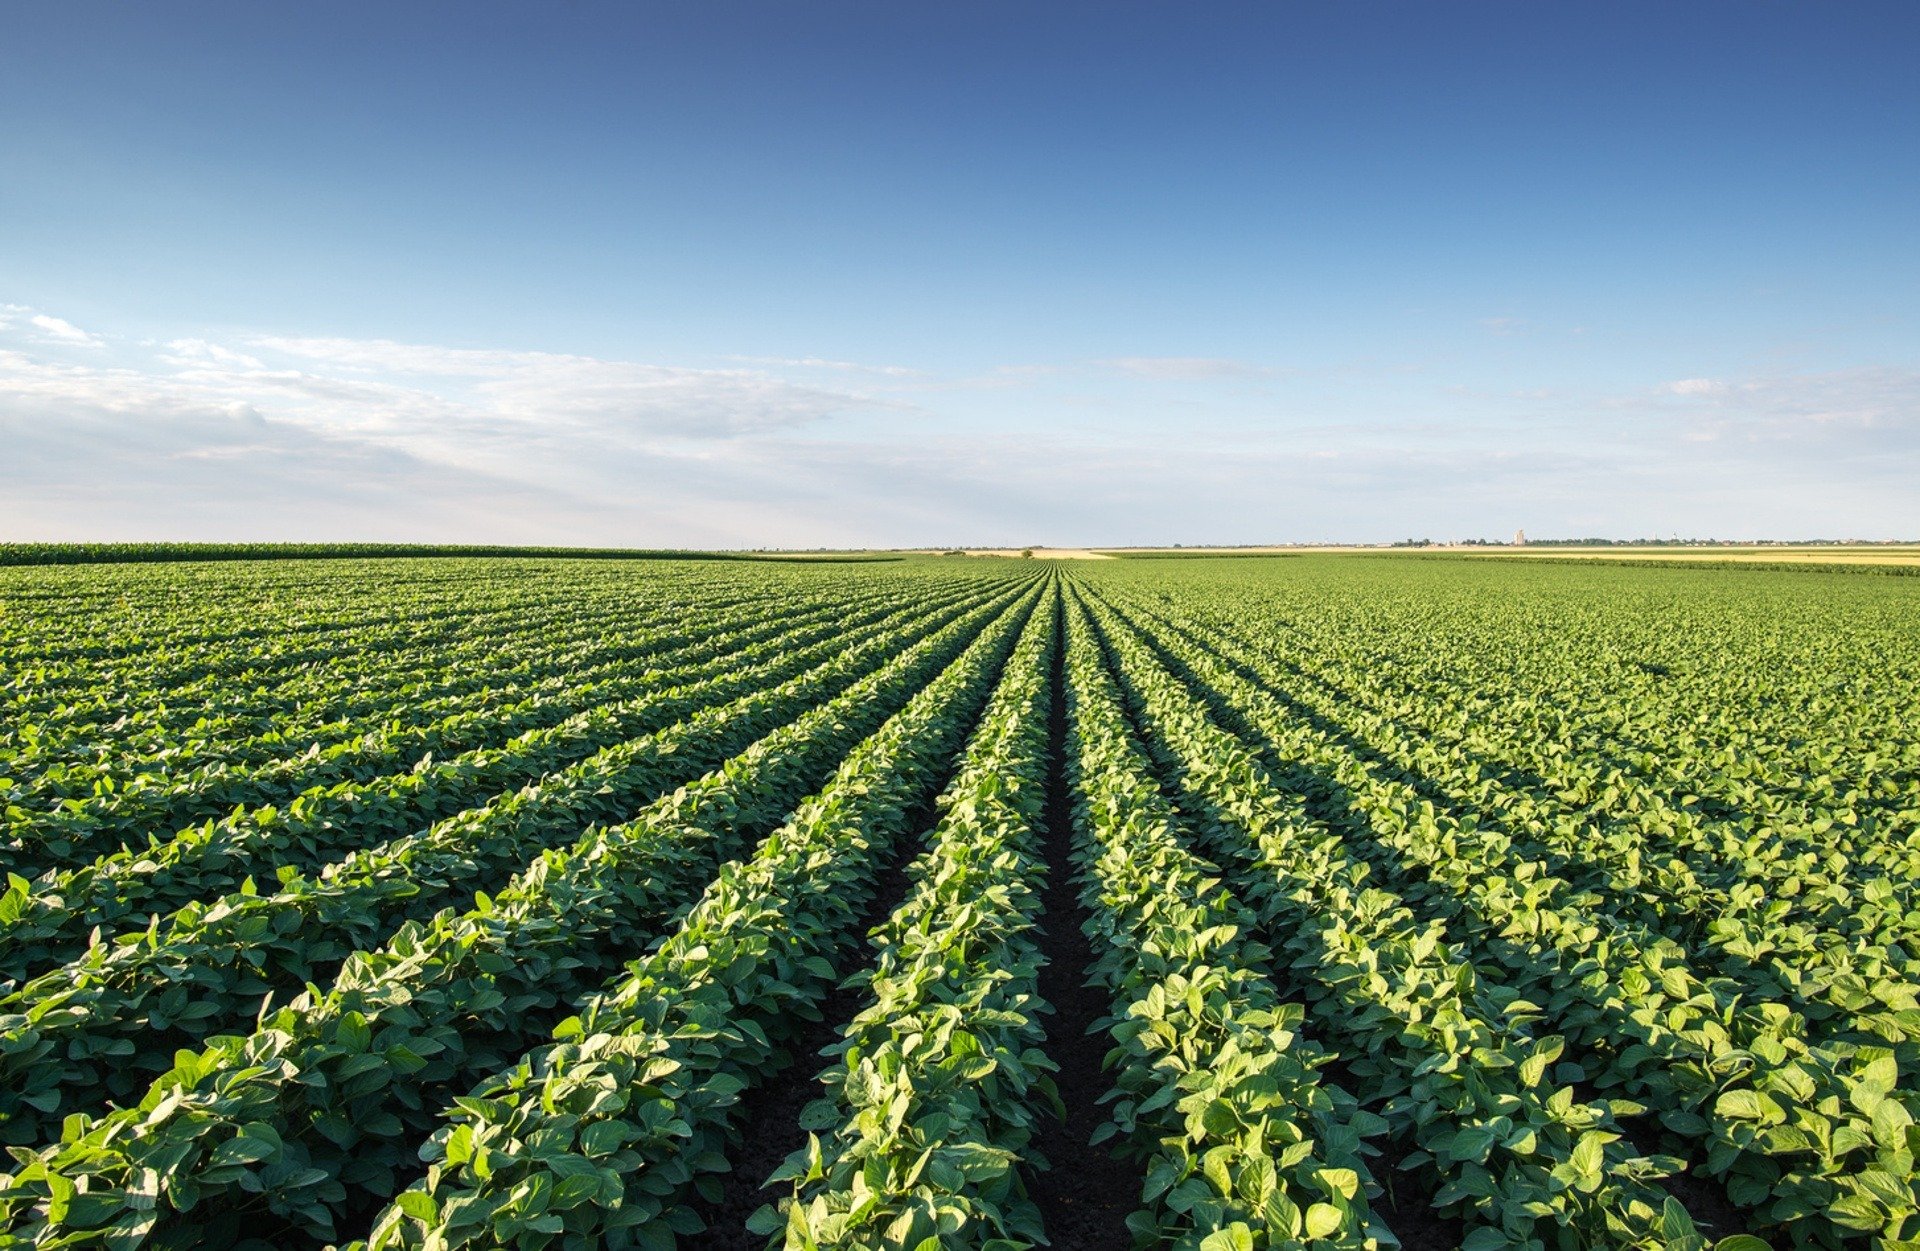 sustainable agriculture vs. industrial agriculture - foodprint